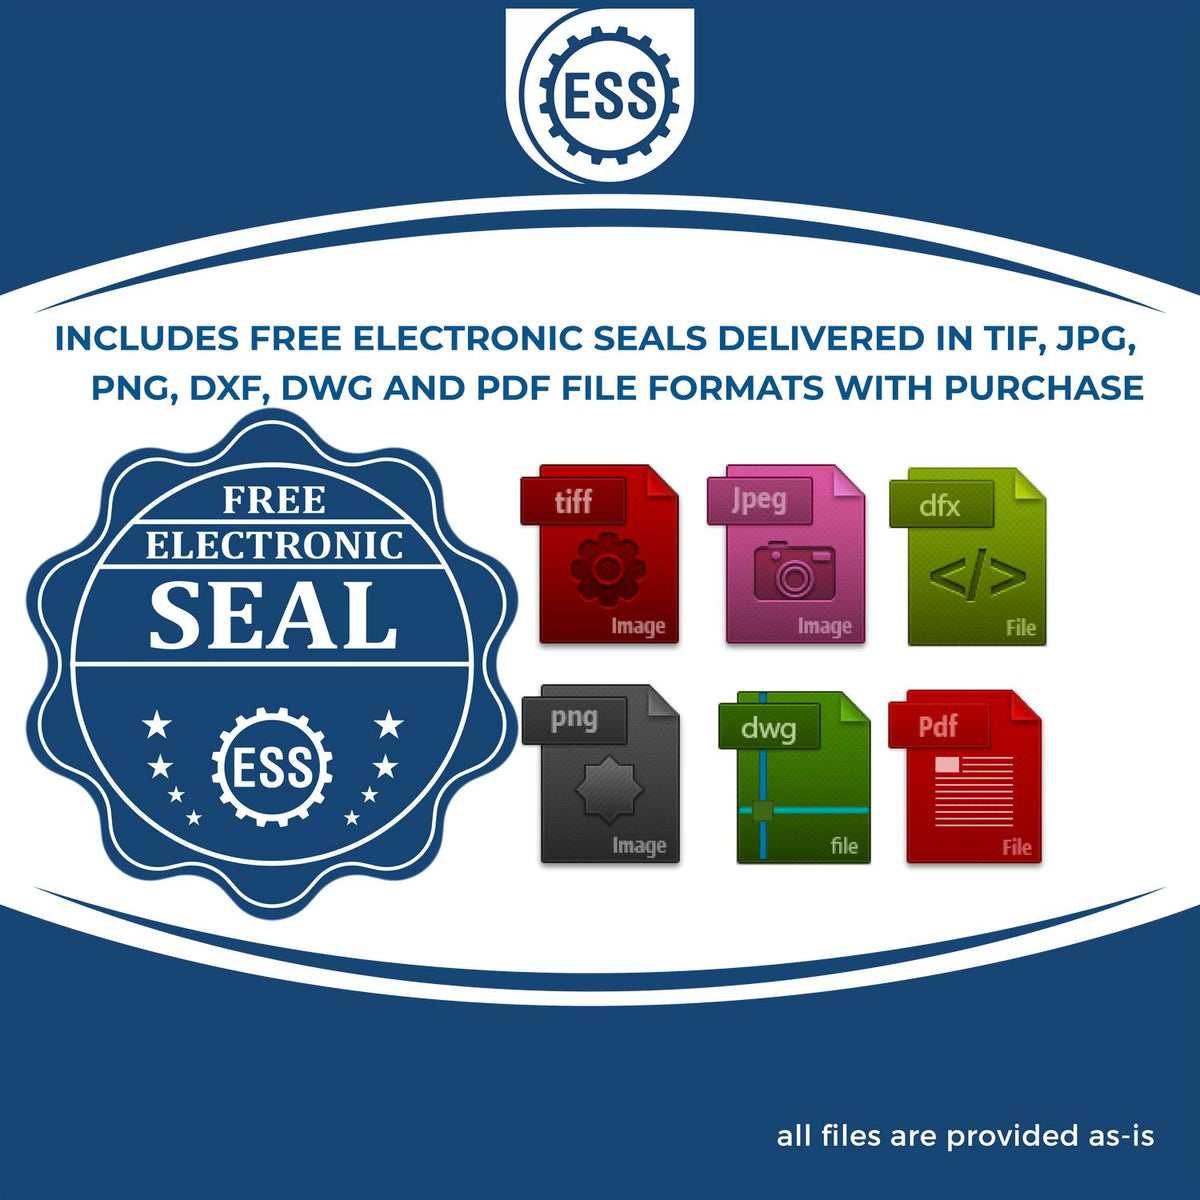 An infographic for the free electronic seal for the Handheld Nevada Land Surveyor Seal illustrating the different file type icons such as DXF, DWG, TIF, JPG and PNG.